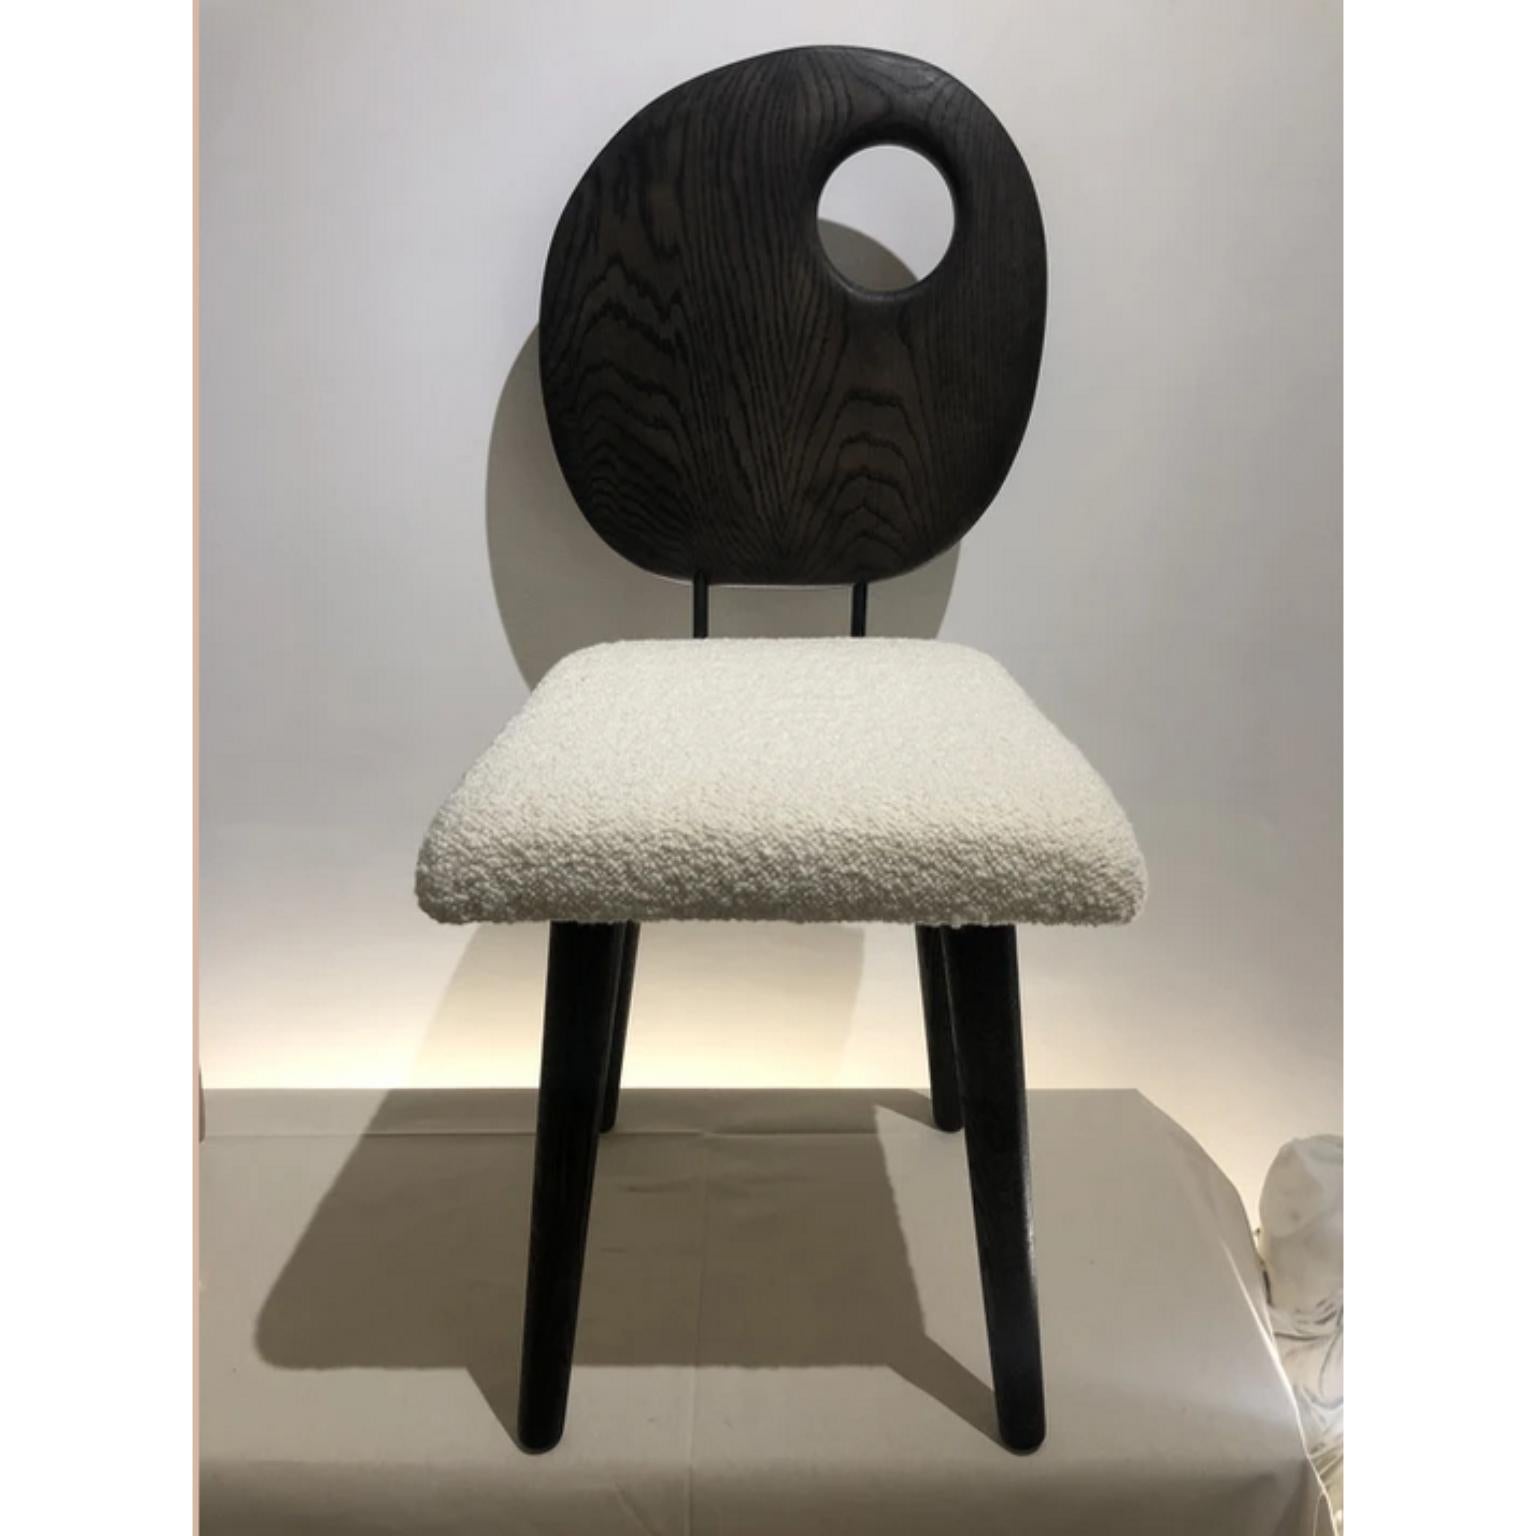 Pebble chair by Fred Rigby studio.
Dimensions: L 39.5 x W 41.2 x H 91 cm.
Materials: solid oak, dedar boucle weave wool.

Fred Rigby studio is a London-based furniture and interior design practice founded by Fred Rigby in 2008. The independent